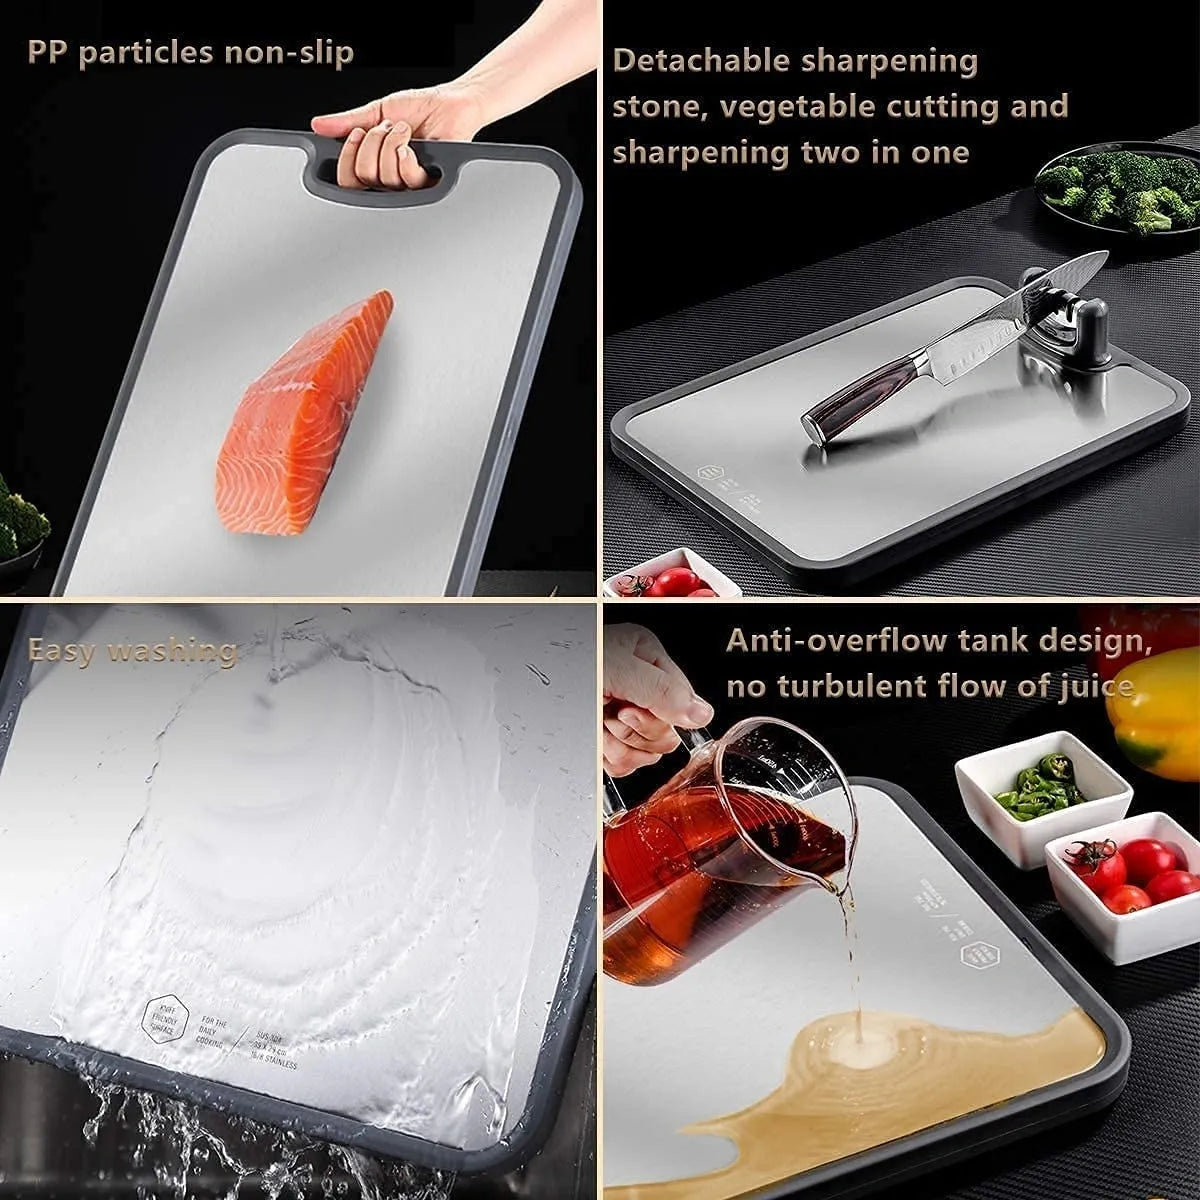 DOCOSS Double Sided Chopping Board for Kitchen / Stainless Steel Cutting Board with Knife Sharpener, Large Vegetable Cutter Board / Cutting Boards Big Size (42 x 30 cm)